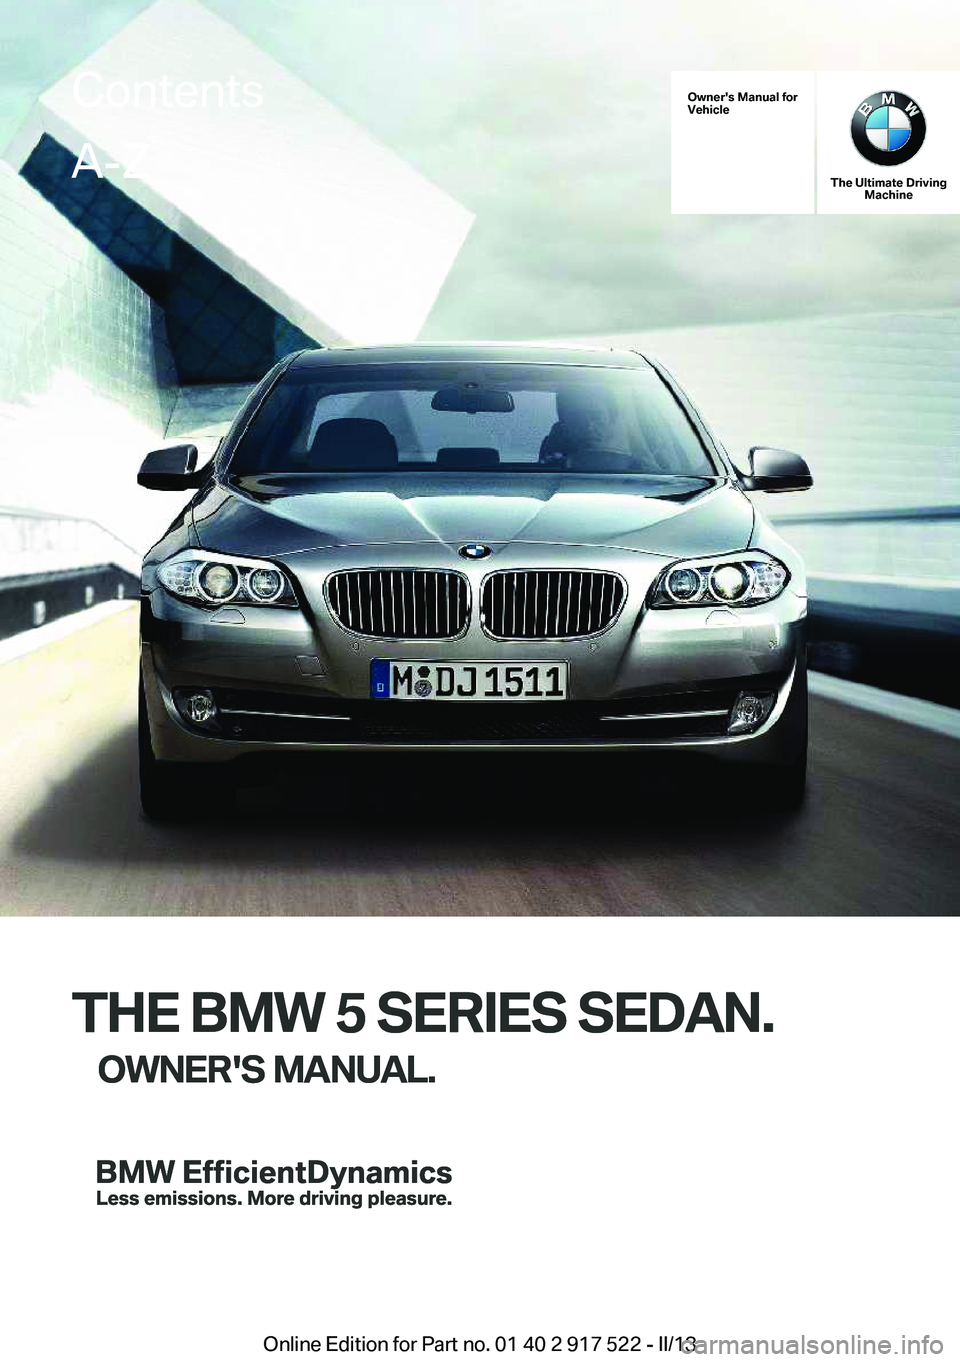 BMW 528I 2013  Owners Manual Owner's Manual for
Vehicle
THE BMW 5 SERIES SEDAN.
OWNER'S MANUAL.
The Ultimate Driving Machine
THE BMW 5 SERIES SEDAN.
OWNER'S MANUAL.
ContentsA-Z
Online Edition for Part no. 01 40 2 917 